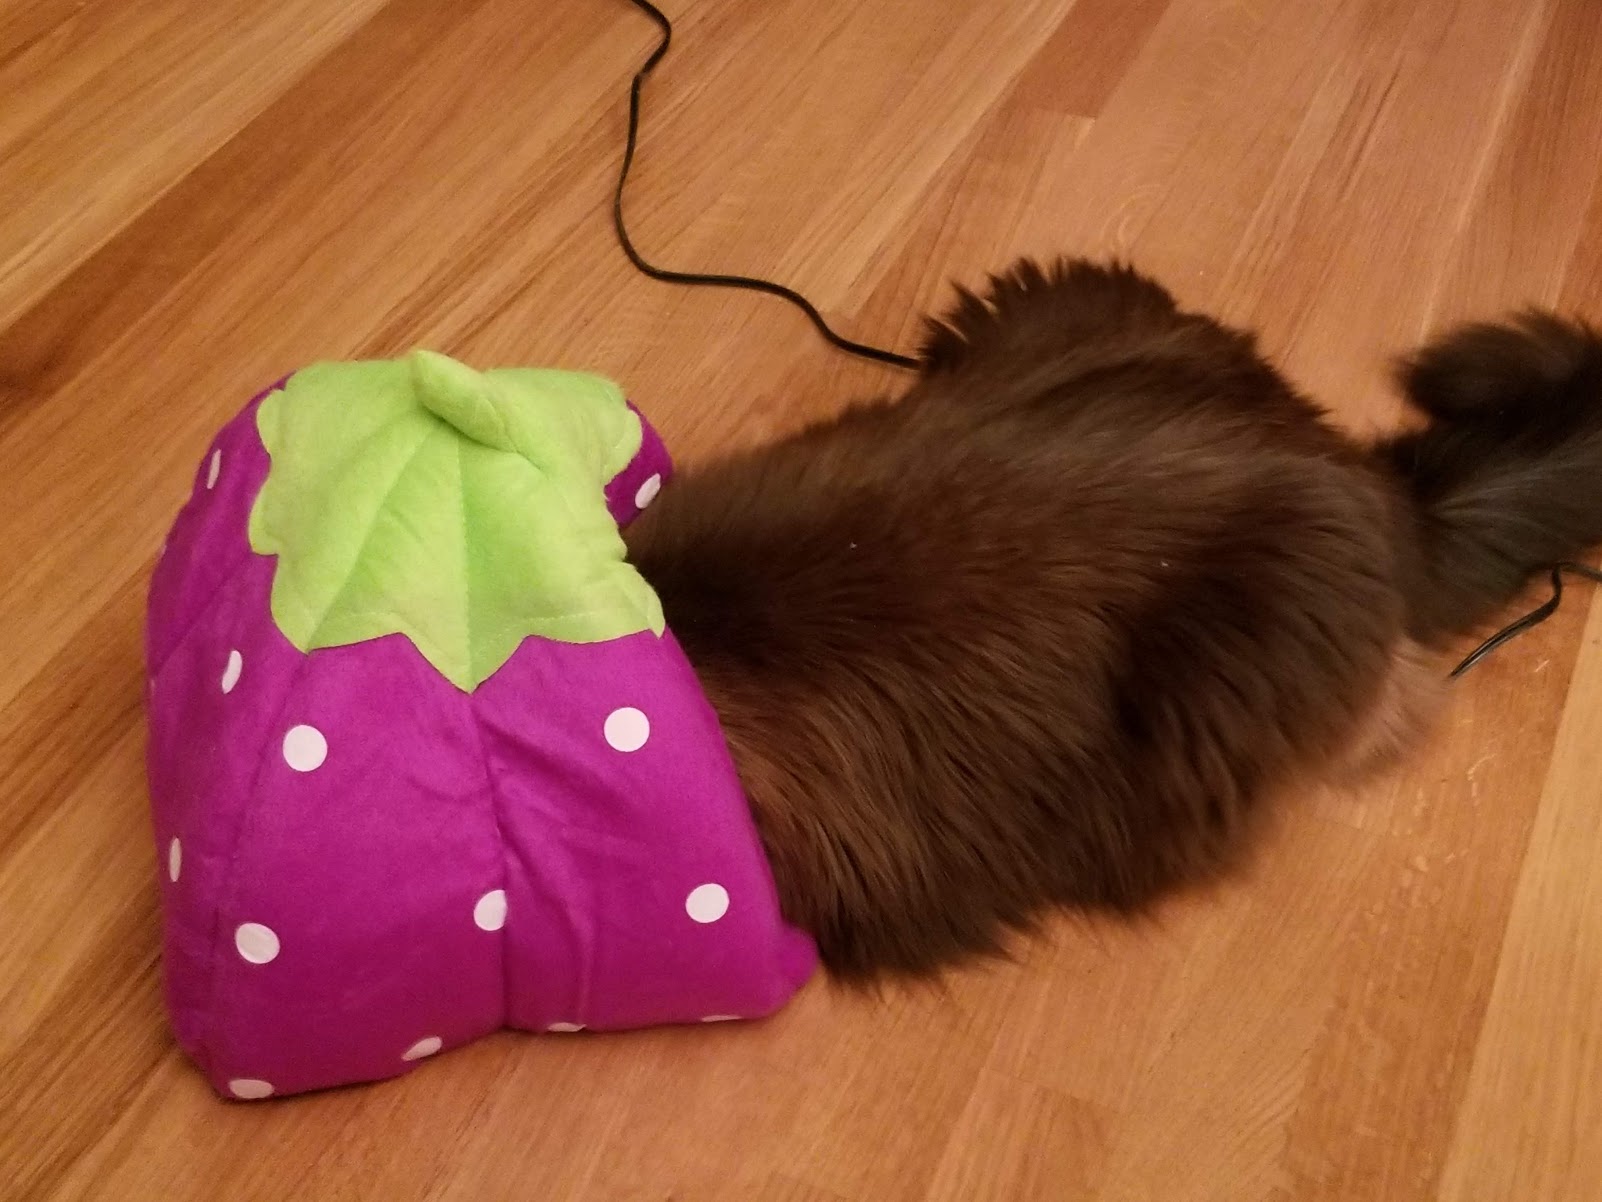 the same cat, with just his head stuck inside of a plush watermelon